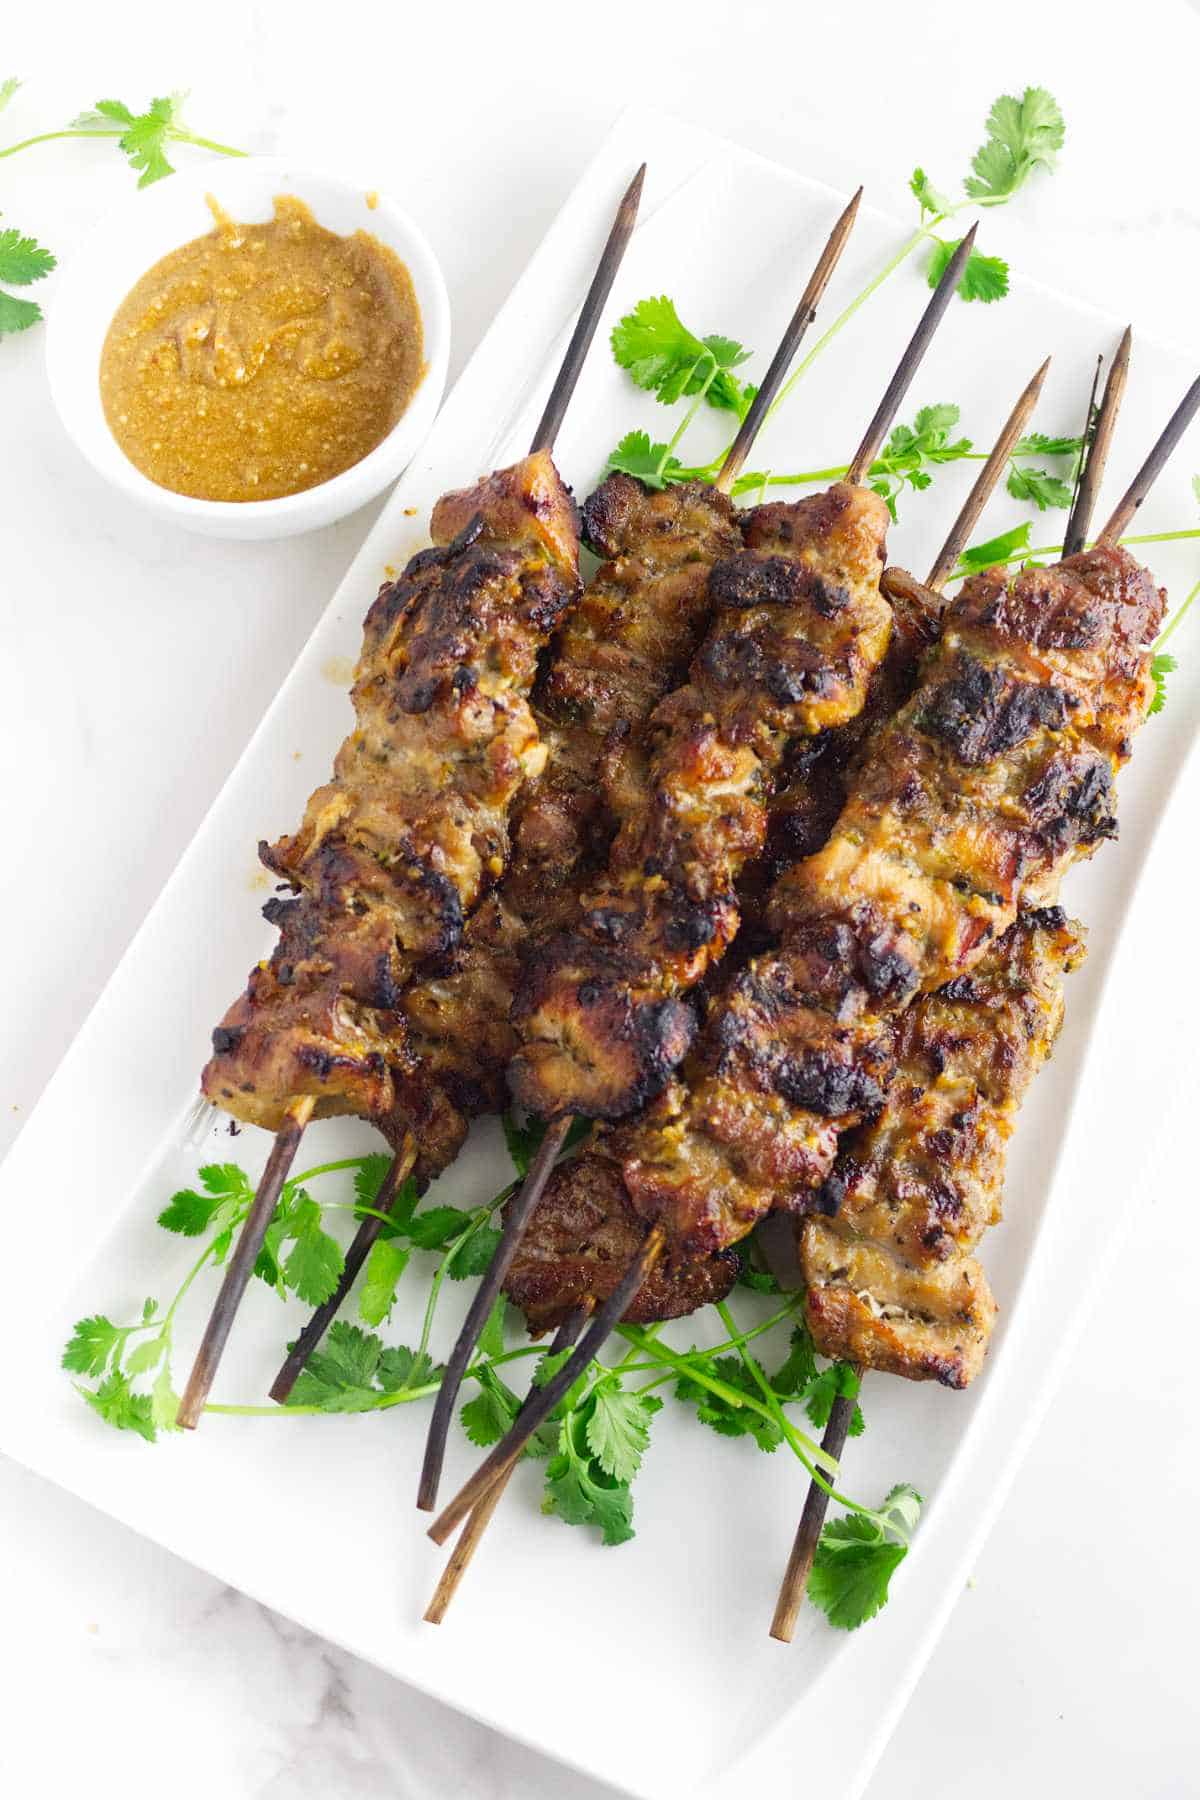 platter of grilled Thai pork skewers (moo ping) with cilantro garnish and spicy peanut dipping sauce.